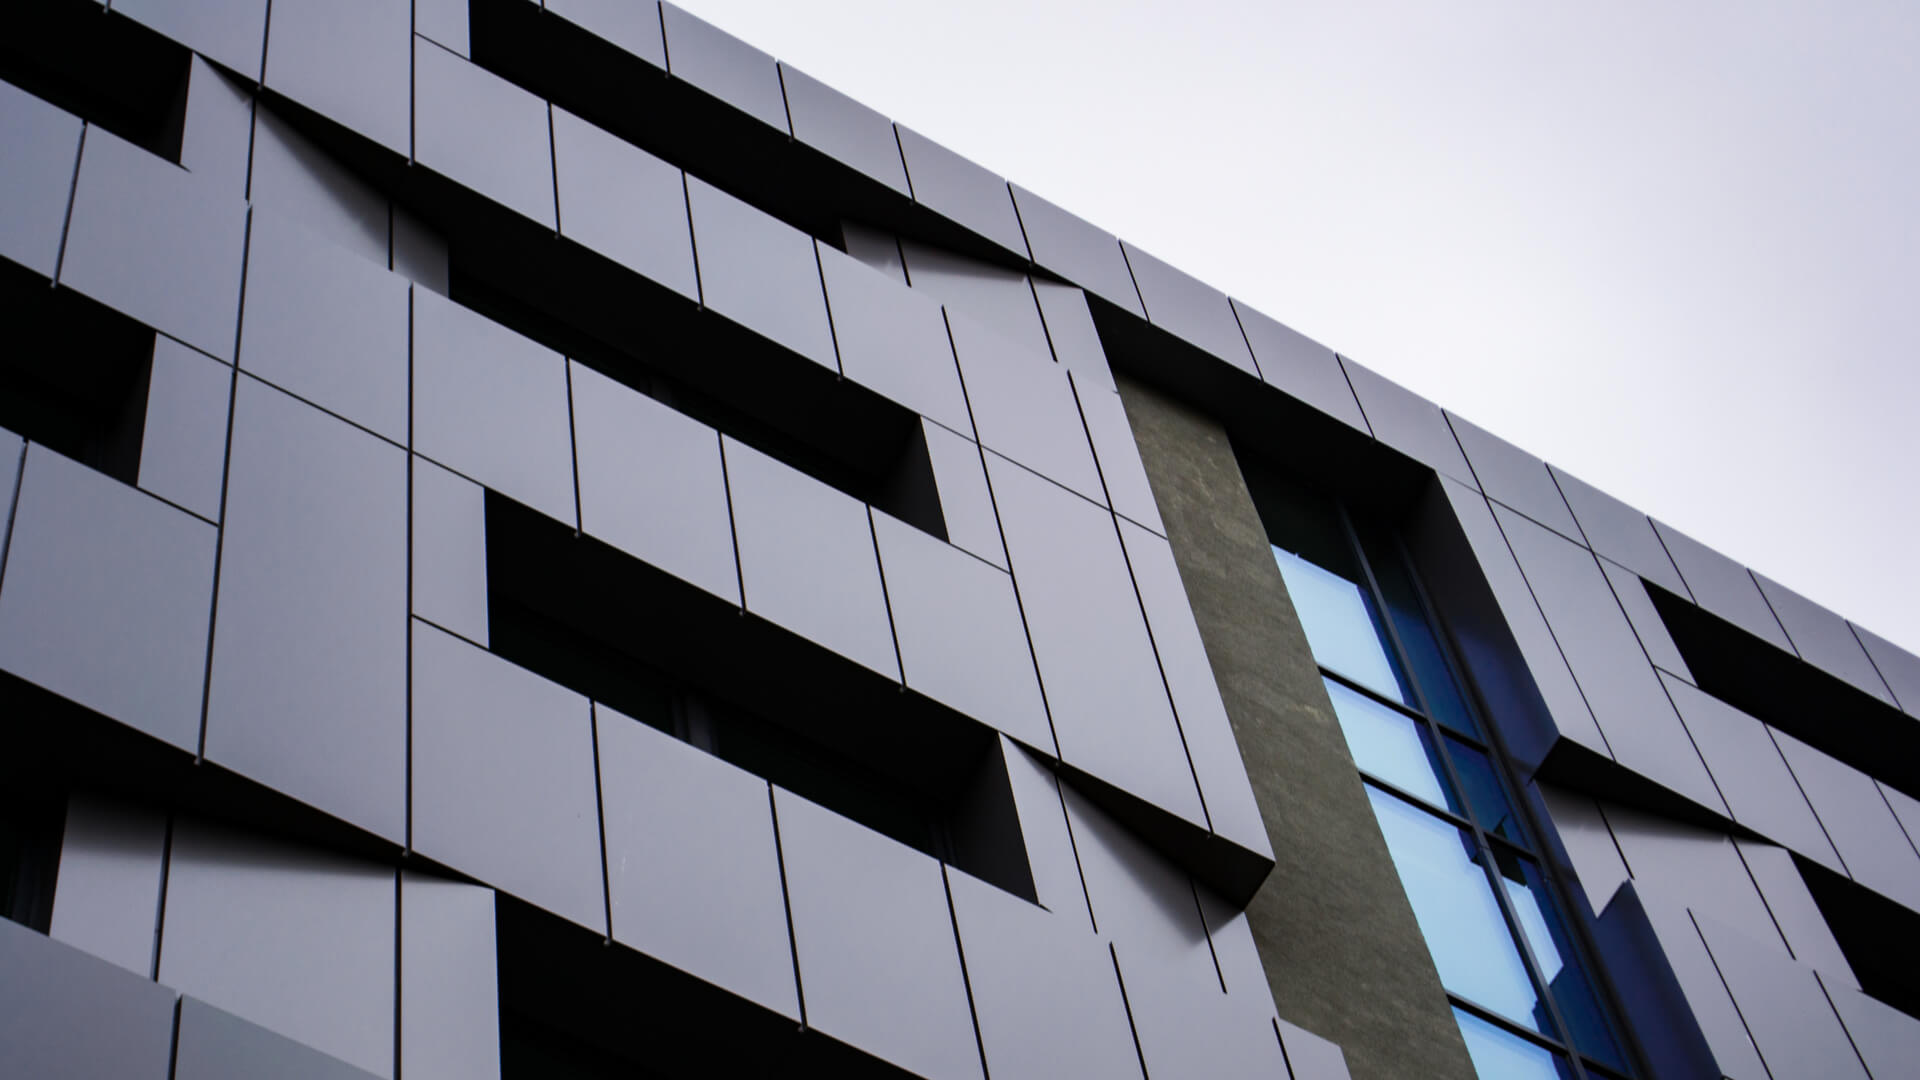 3 key elements of architectural aluminium for sustainable designs